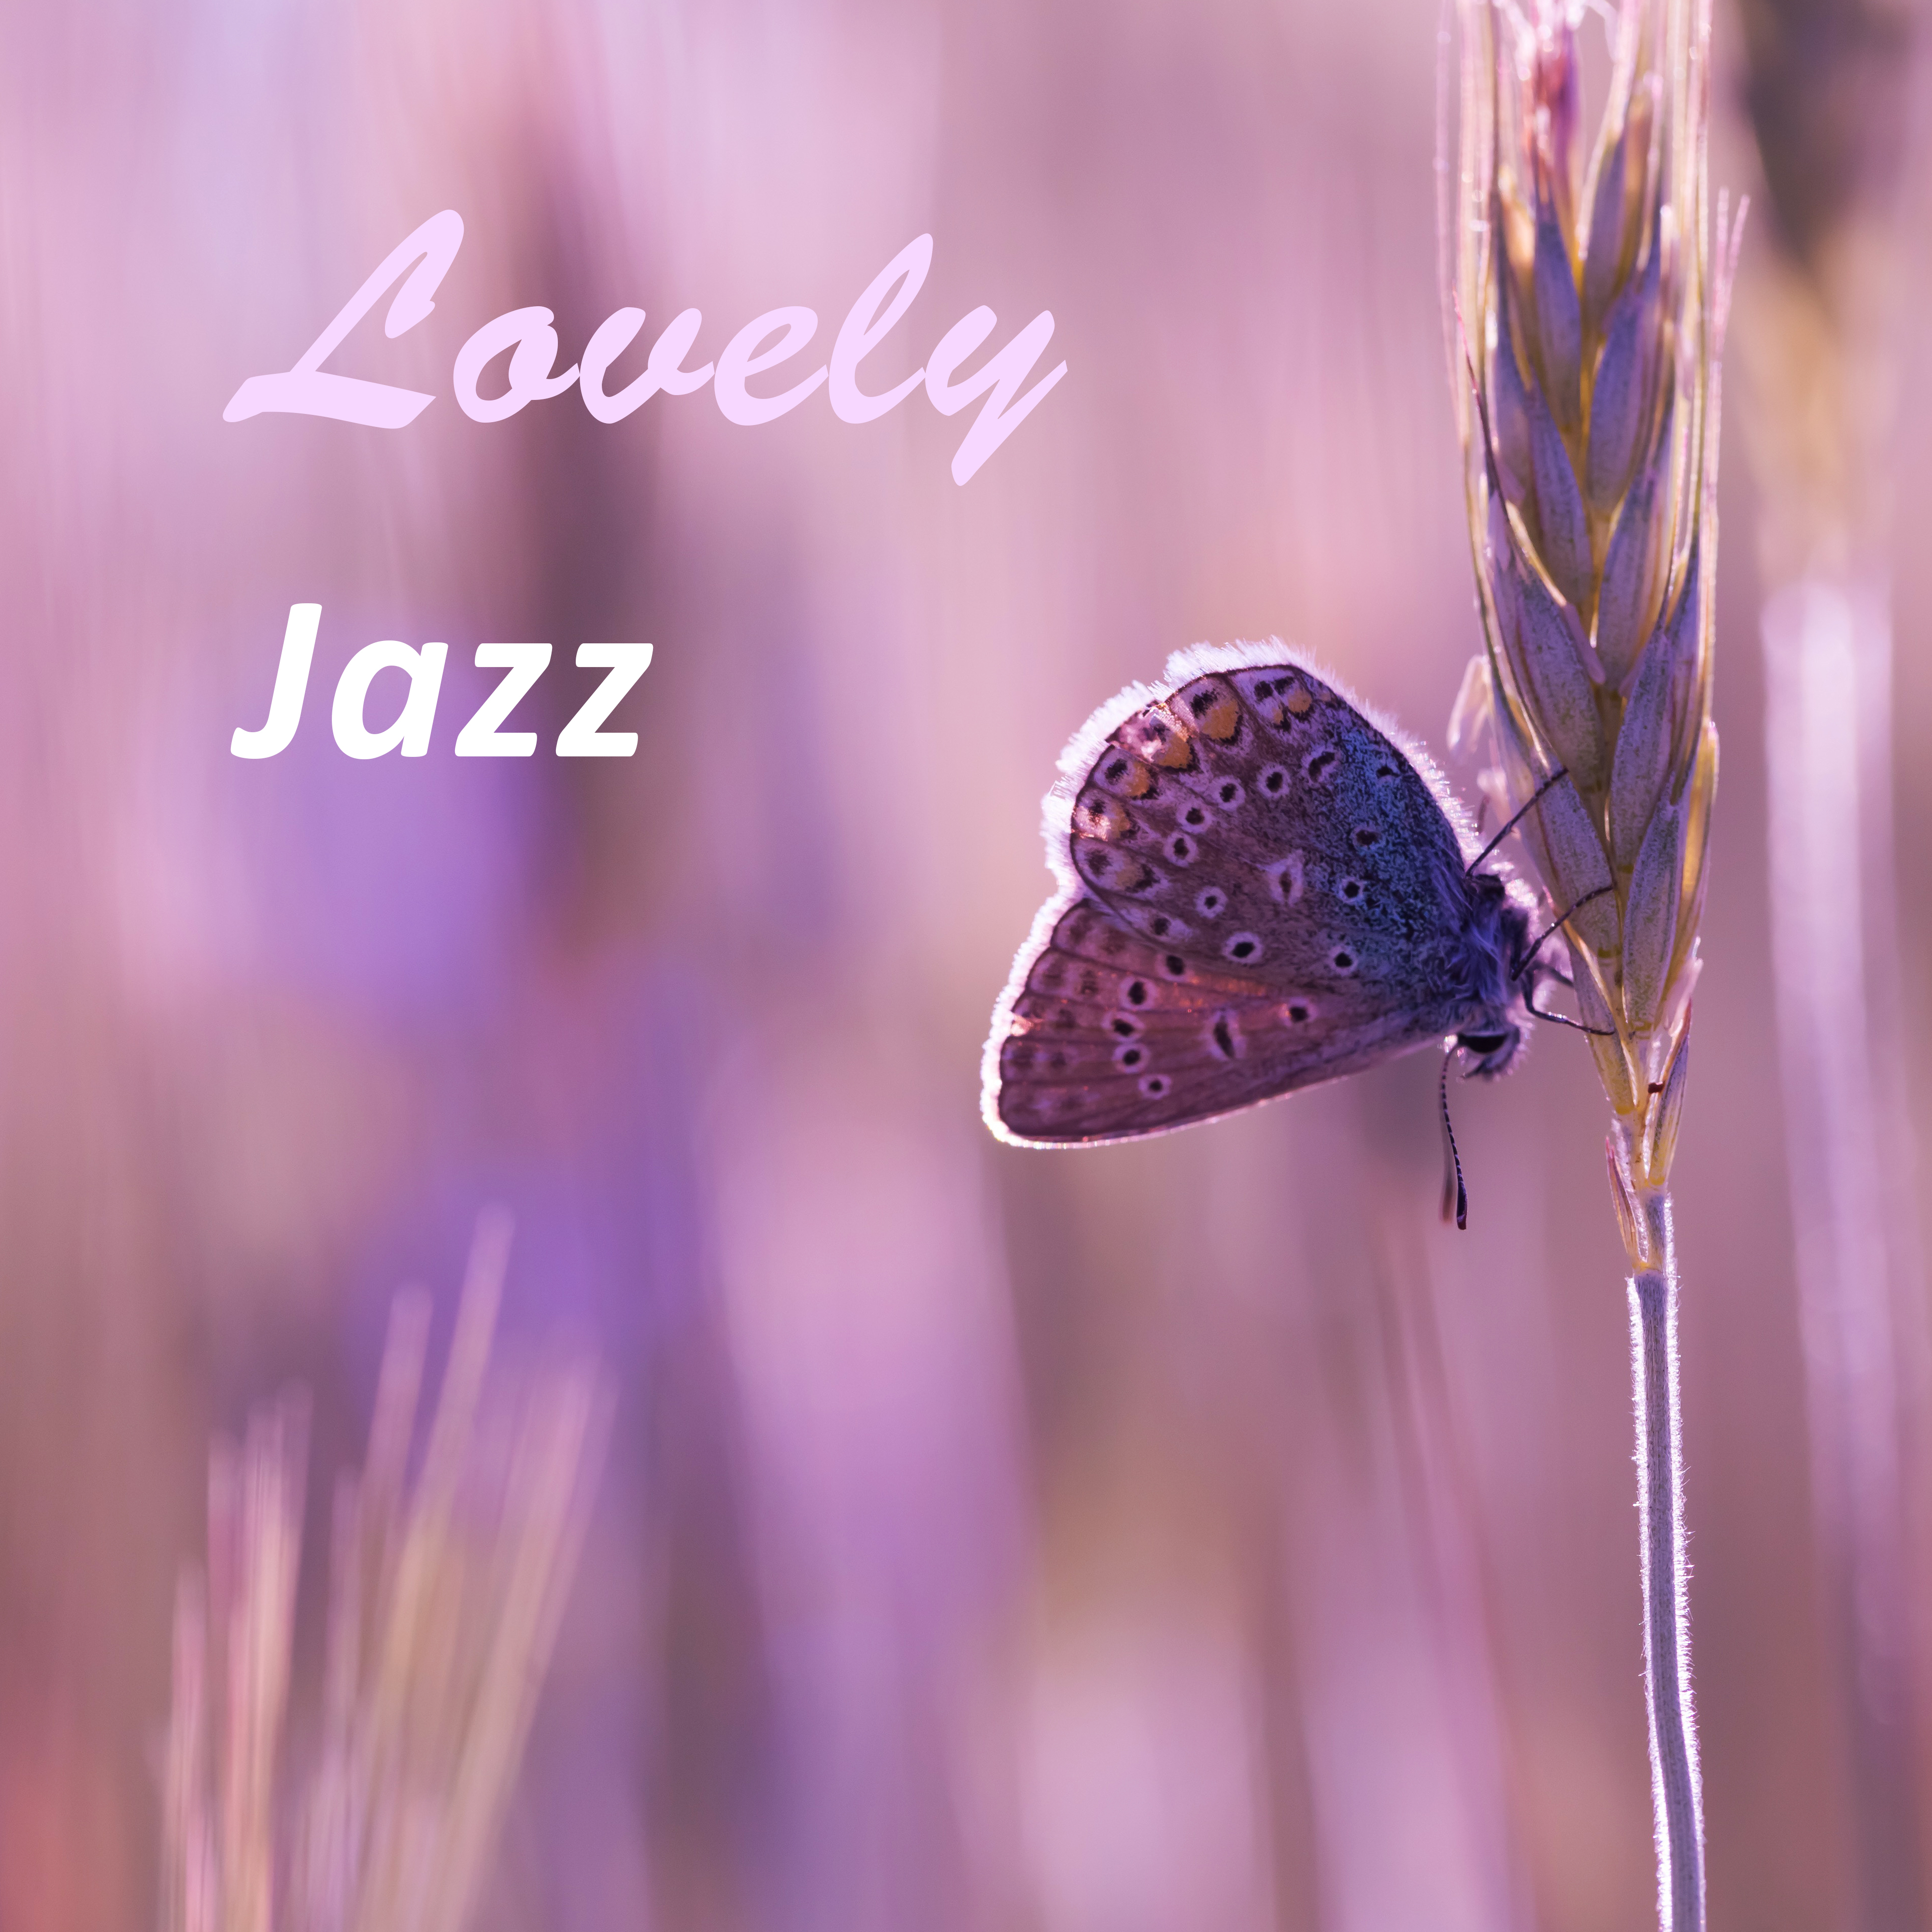 Lovely Jazz  Romantic Background for Calm Evening